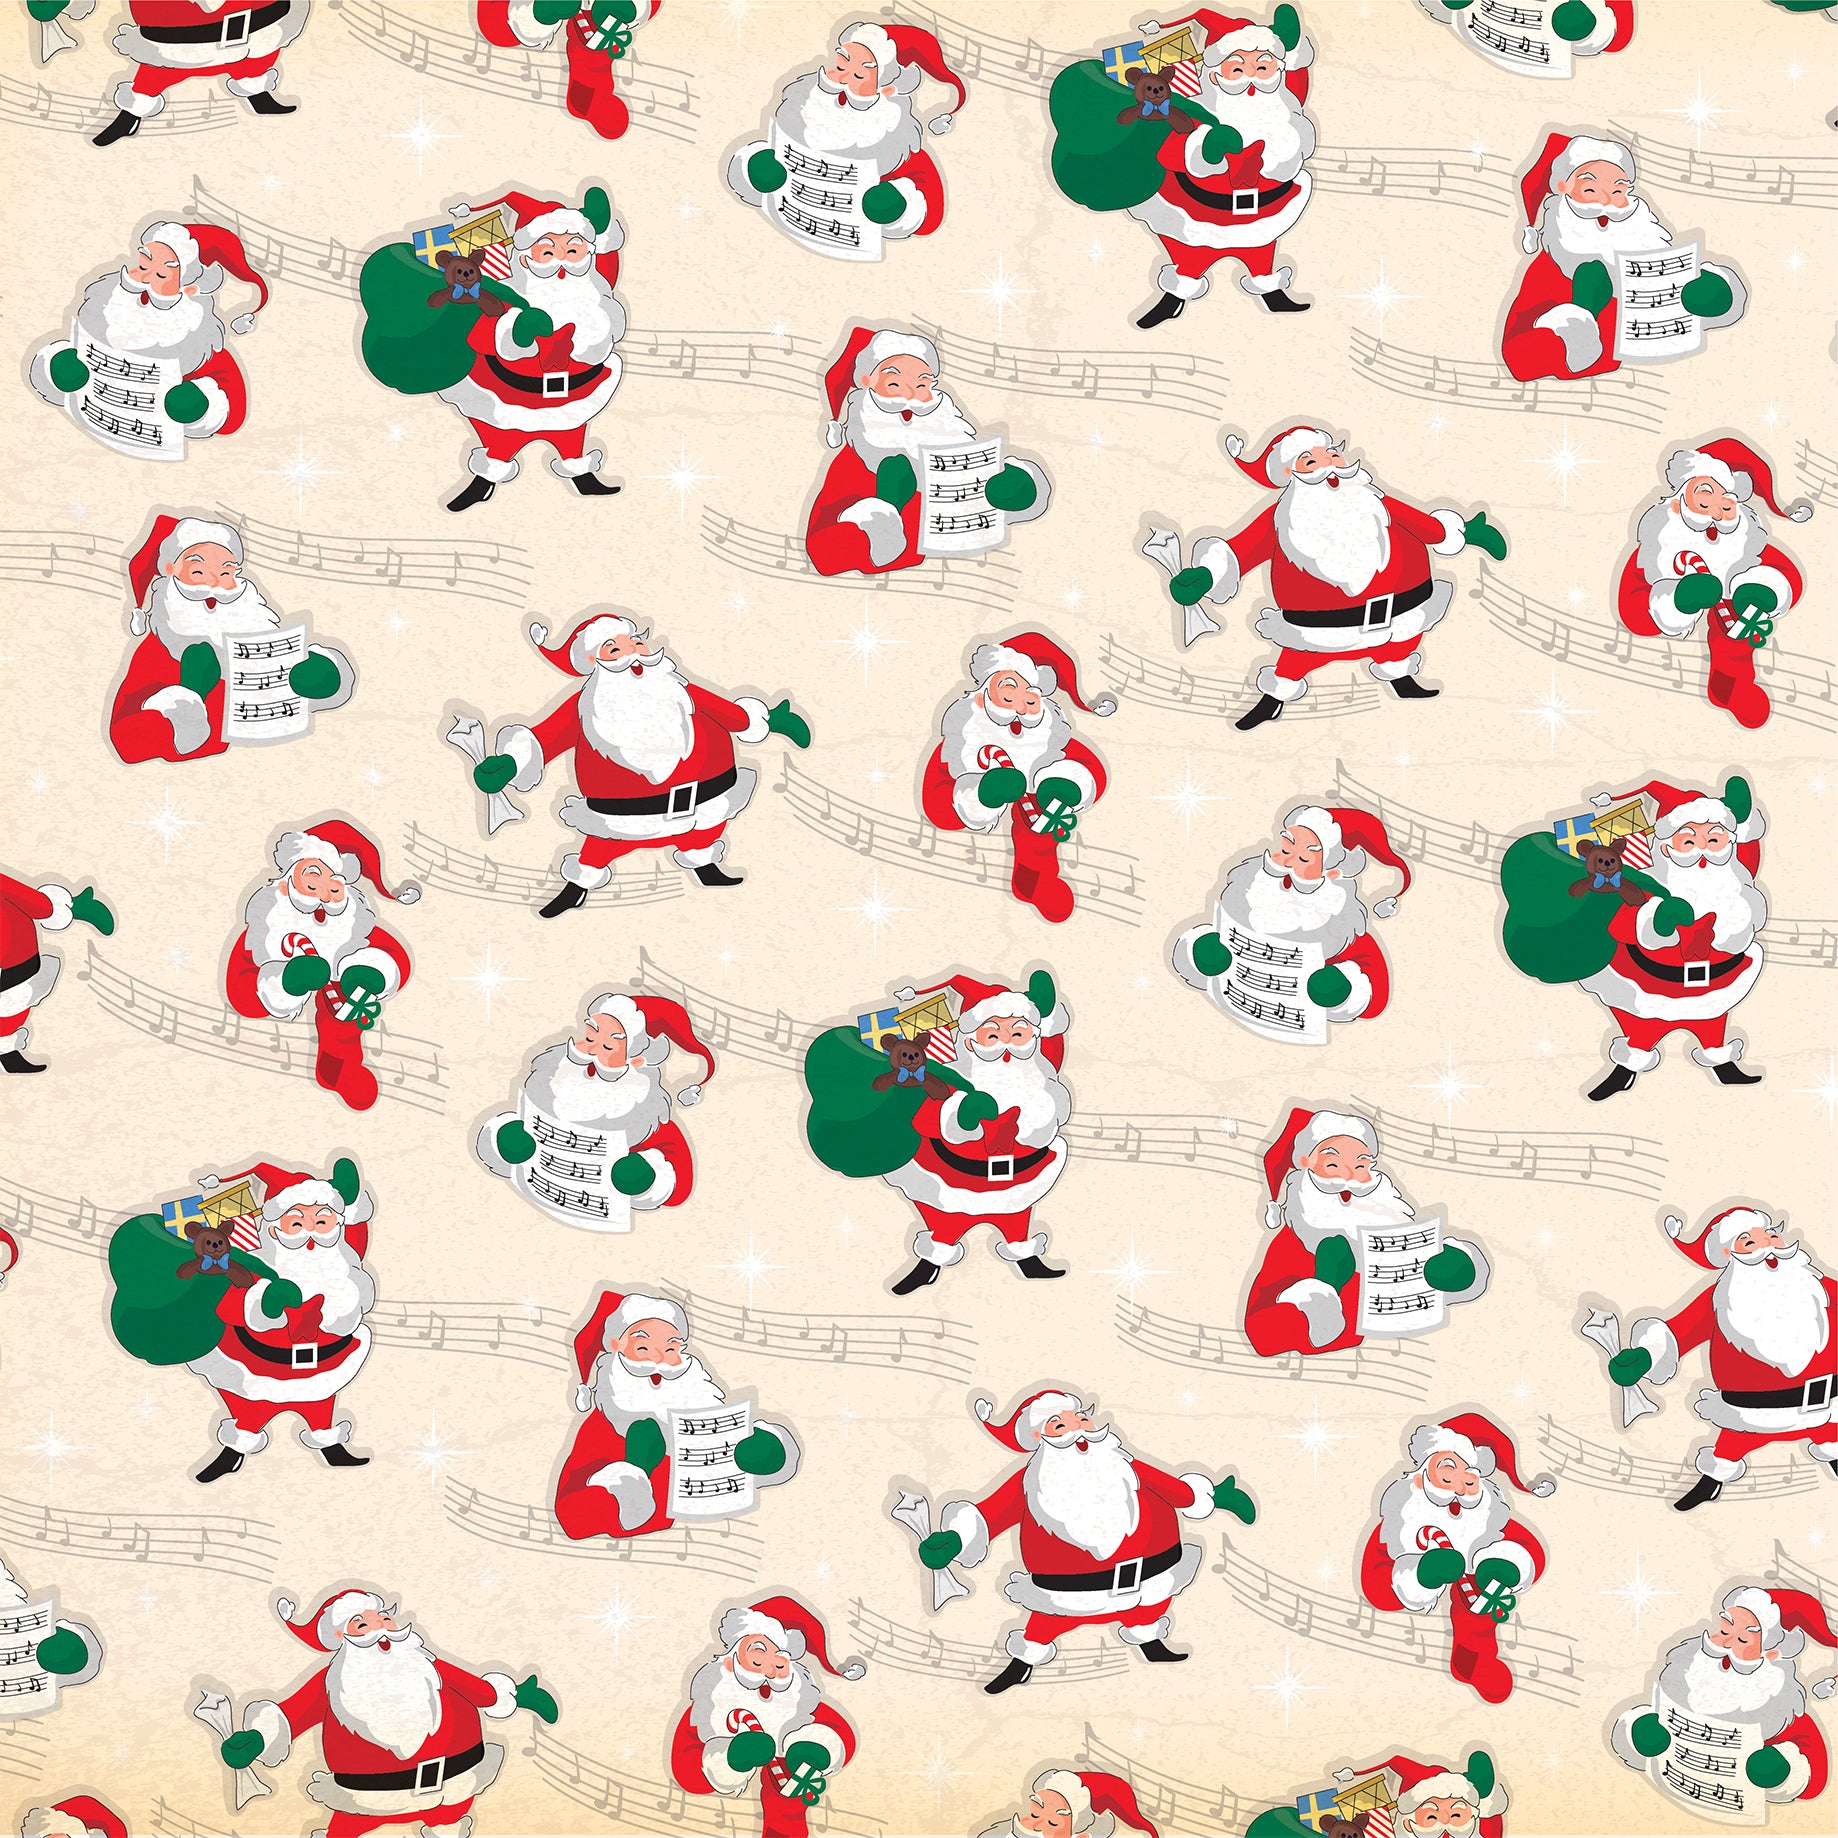 Season's Greetings Collection I Believe In Santa 12 x 12 Double-Sided Scrapbook Paper by Carta Bella